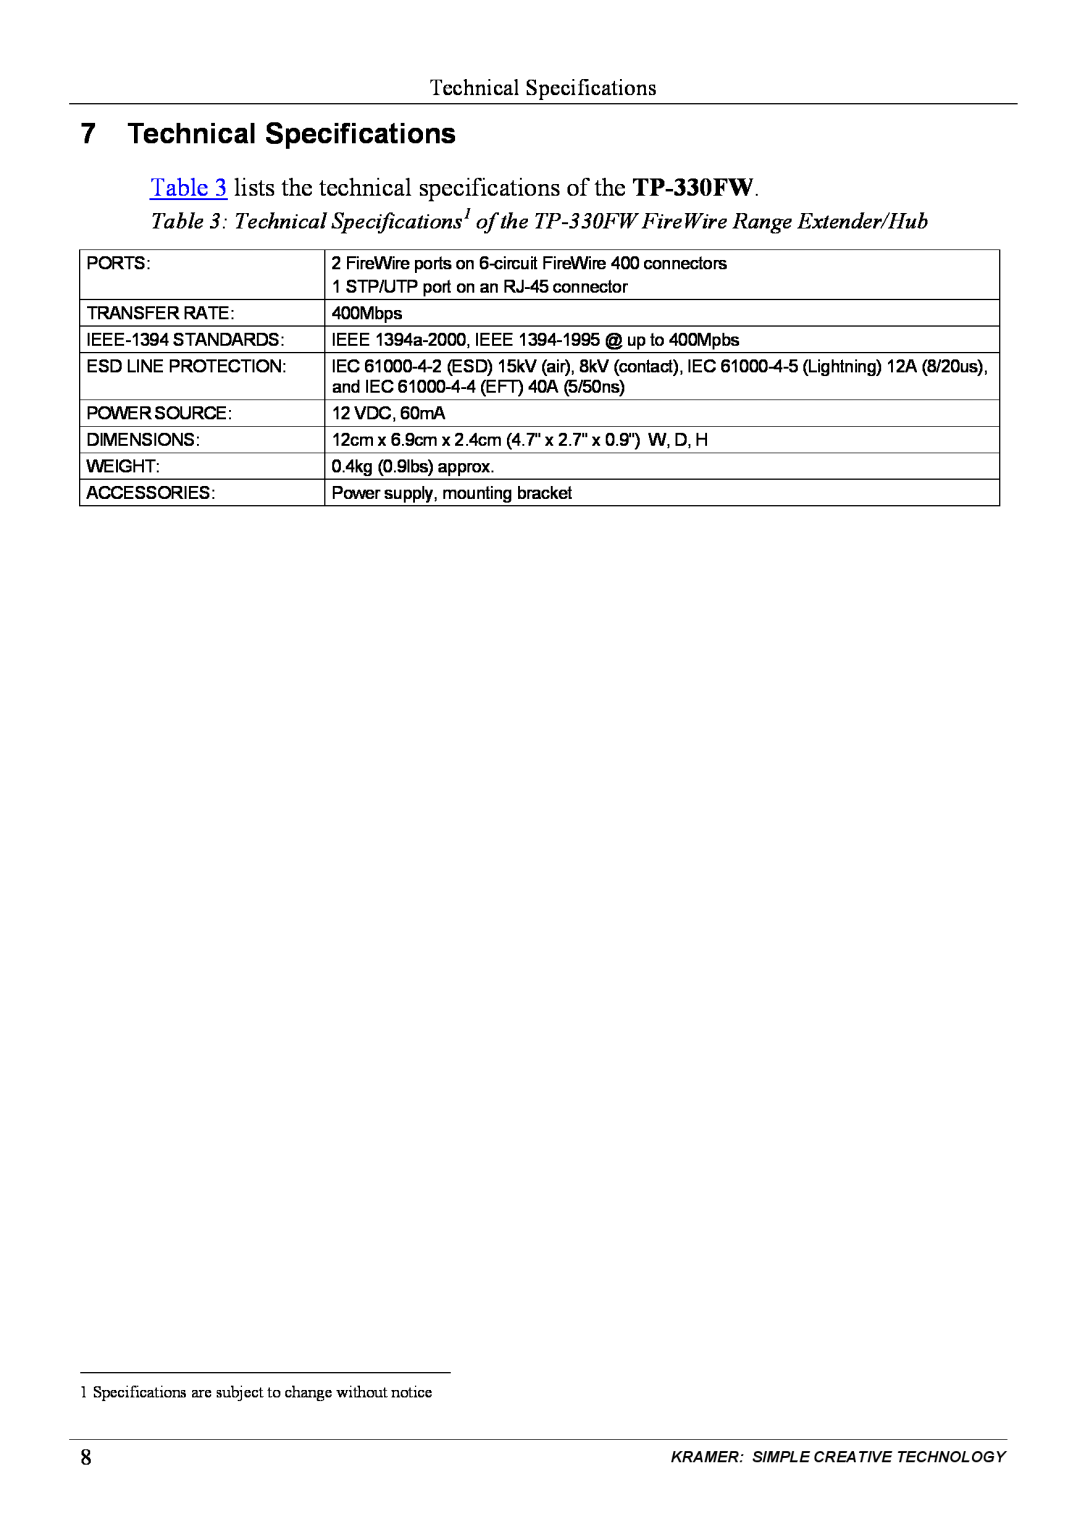 Kramer Electronics TP-330FW user manual Technical Specifications 